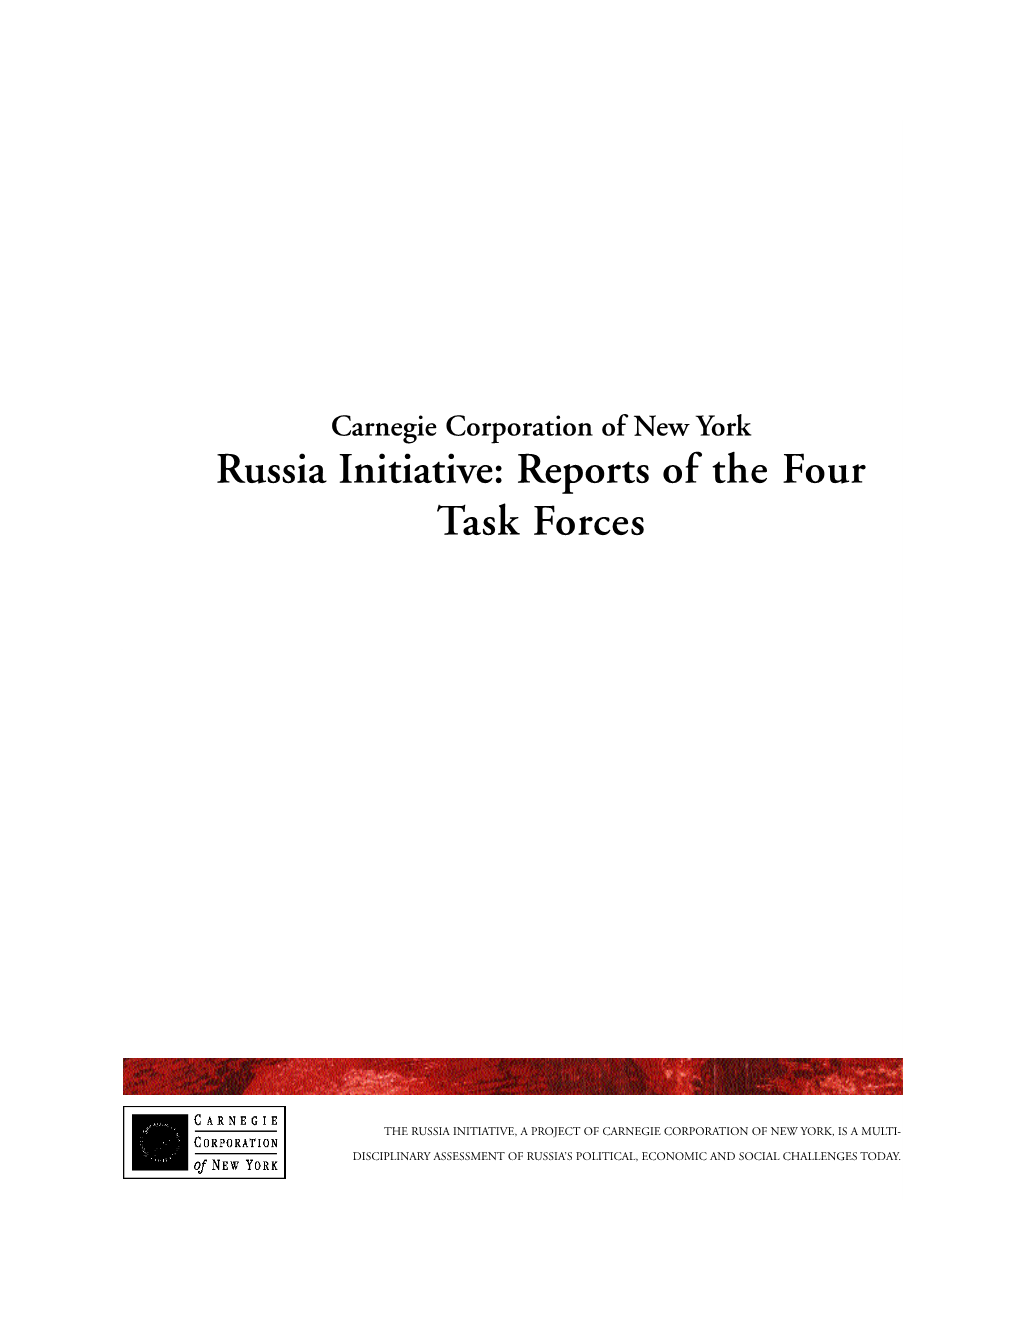 Russia Initiative: Reports of the Four Task Forces